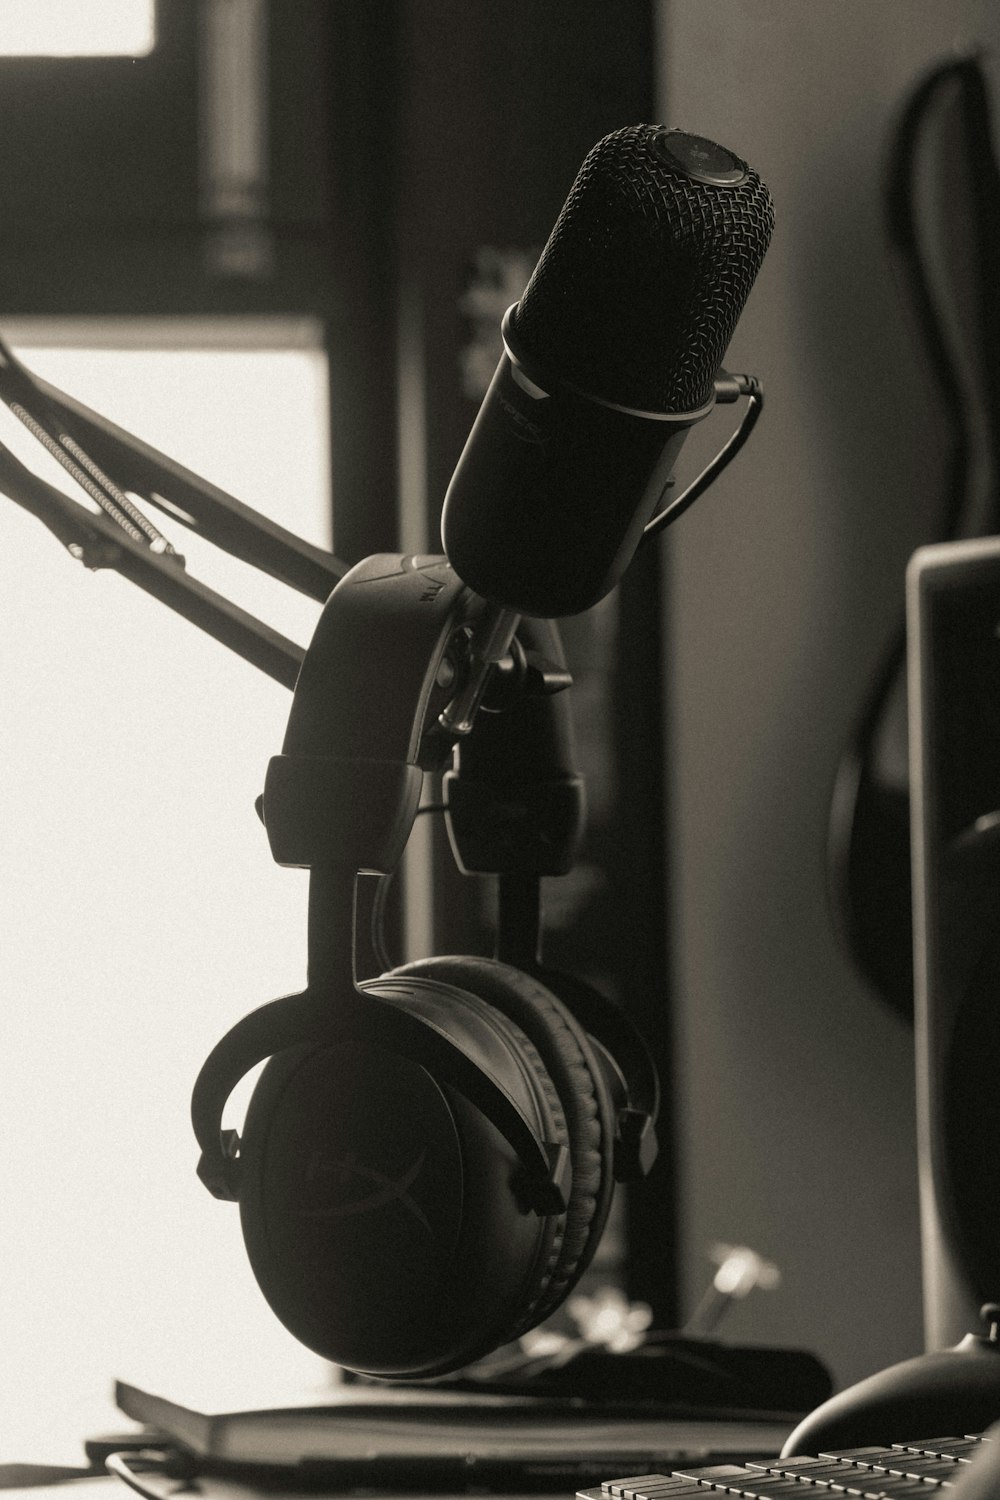 a black and white photo of a microphone and headphones